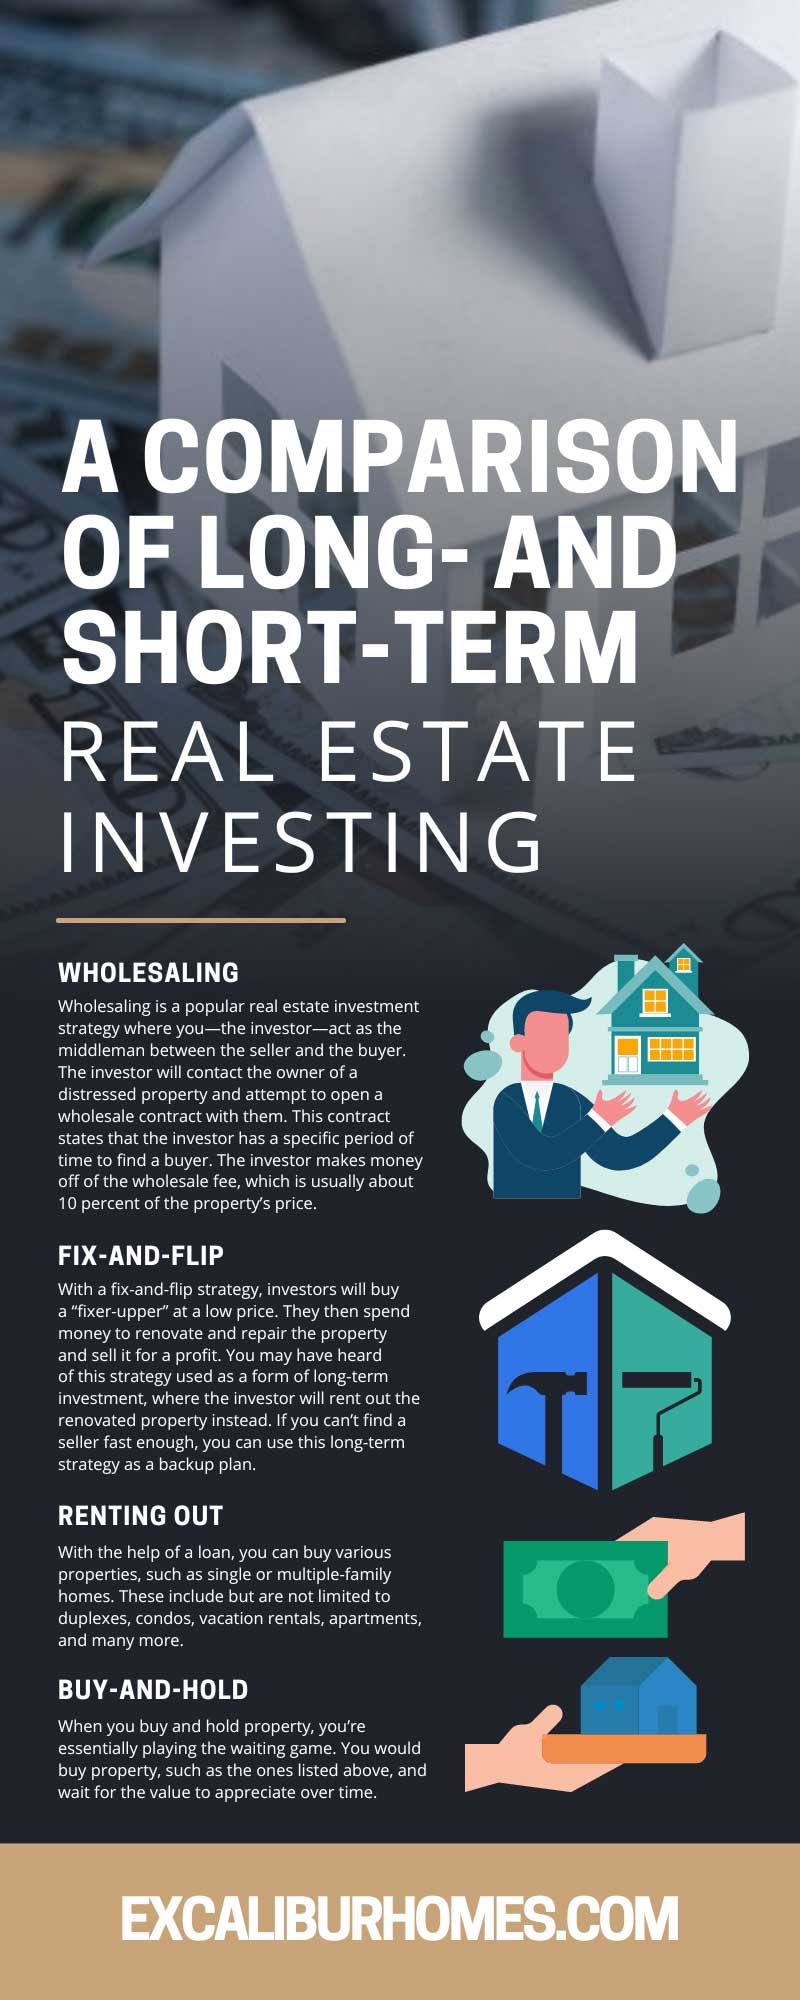 A Comparison of Long- and Short-Term Real Estate Investing